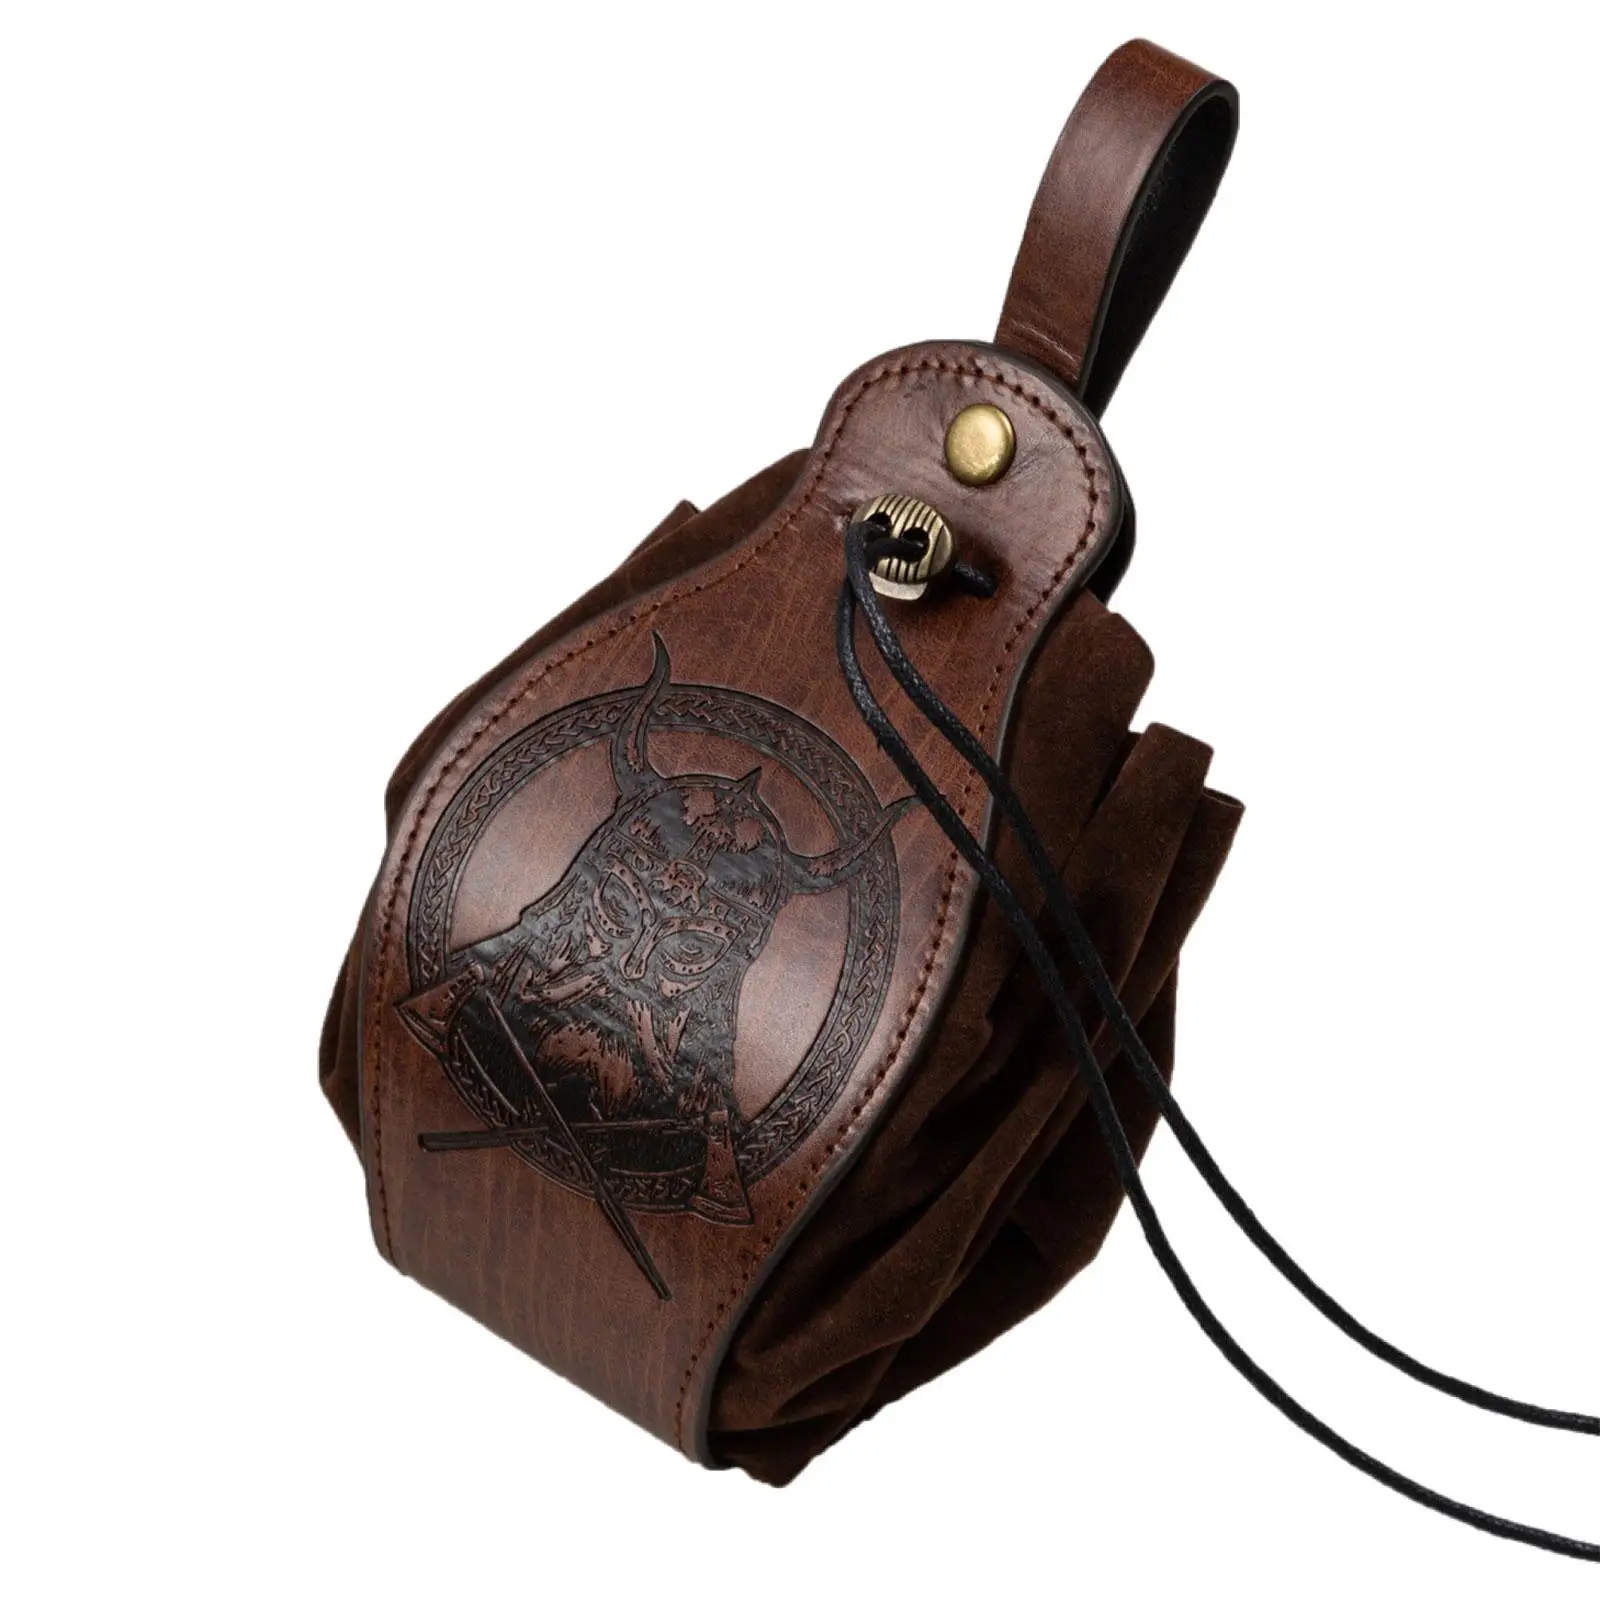 Medieval Drawstring Pouch PU Leather Bum Bags Casual Dice Bag Waist Bag Fanny Pack for Walking Party Camping Trekking Running